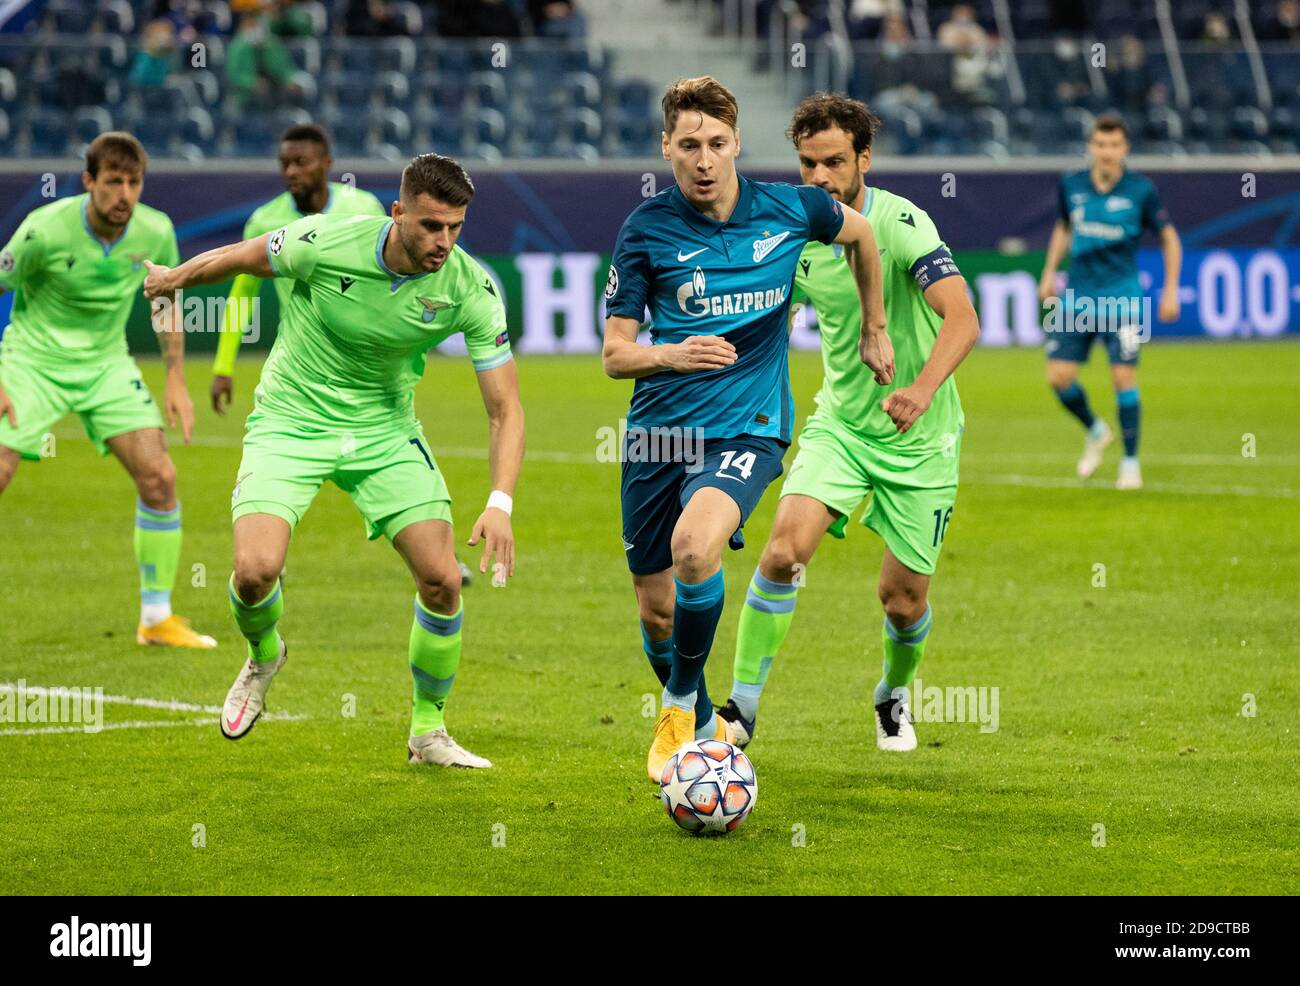 SAINT PETERSBURG, RUSSIA - NOVEMBER 04: Daler Kuzyayev of Zenit St Petersburg is surrounded by Joaquín Correa & Marco Parolo of SS Lazio during the UEFA Champions League Group F stage match between Zenit St. Petersburg and SS Lazio at Gazprom Arena on November 4, 2020 in Saint Petersburg, Russia. (Photo by MB Media) Stock Photo